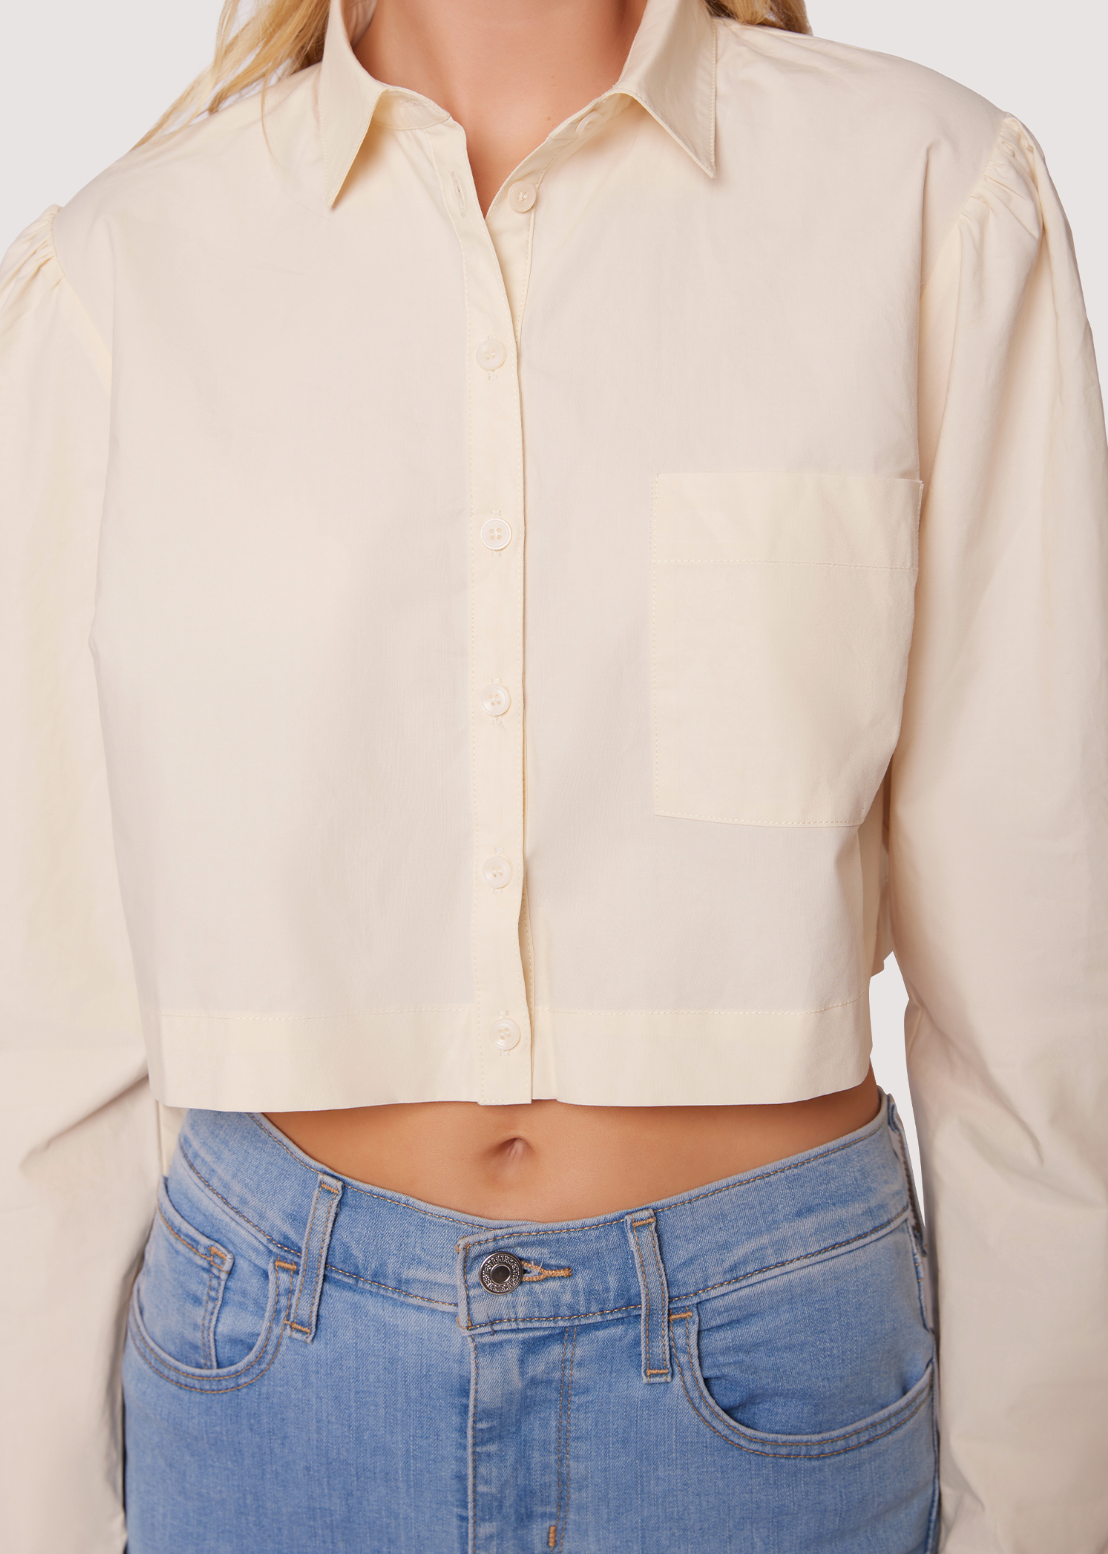 Sunny Business Boxy Crop Top